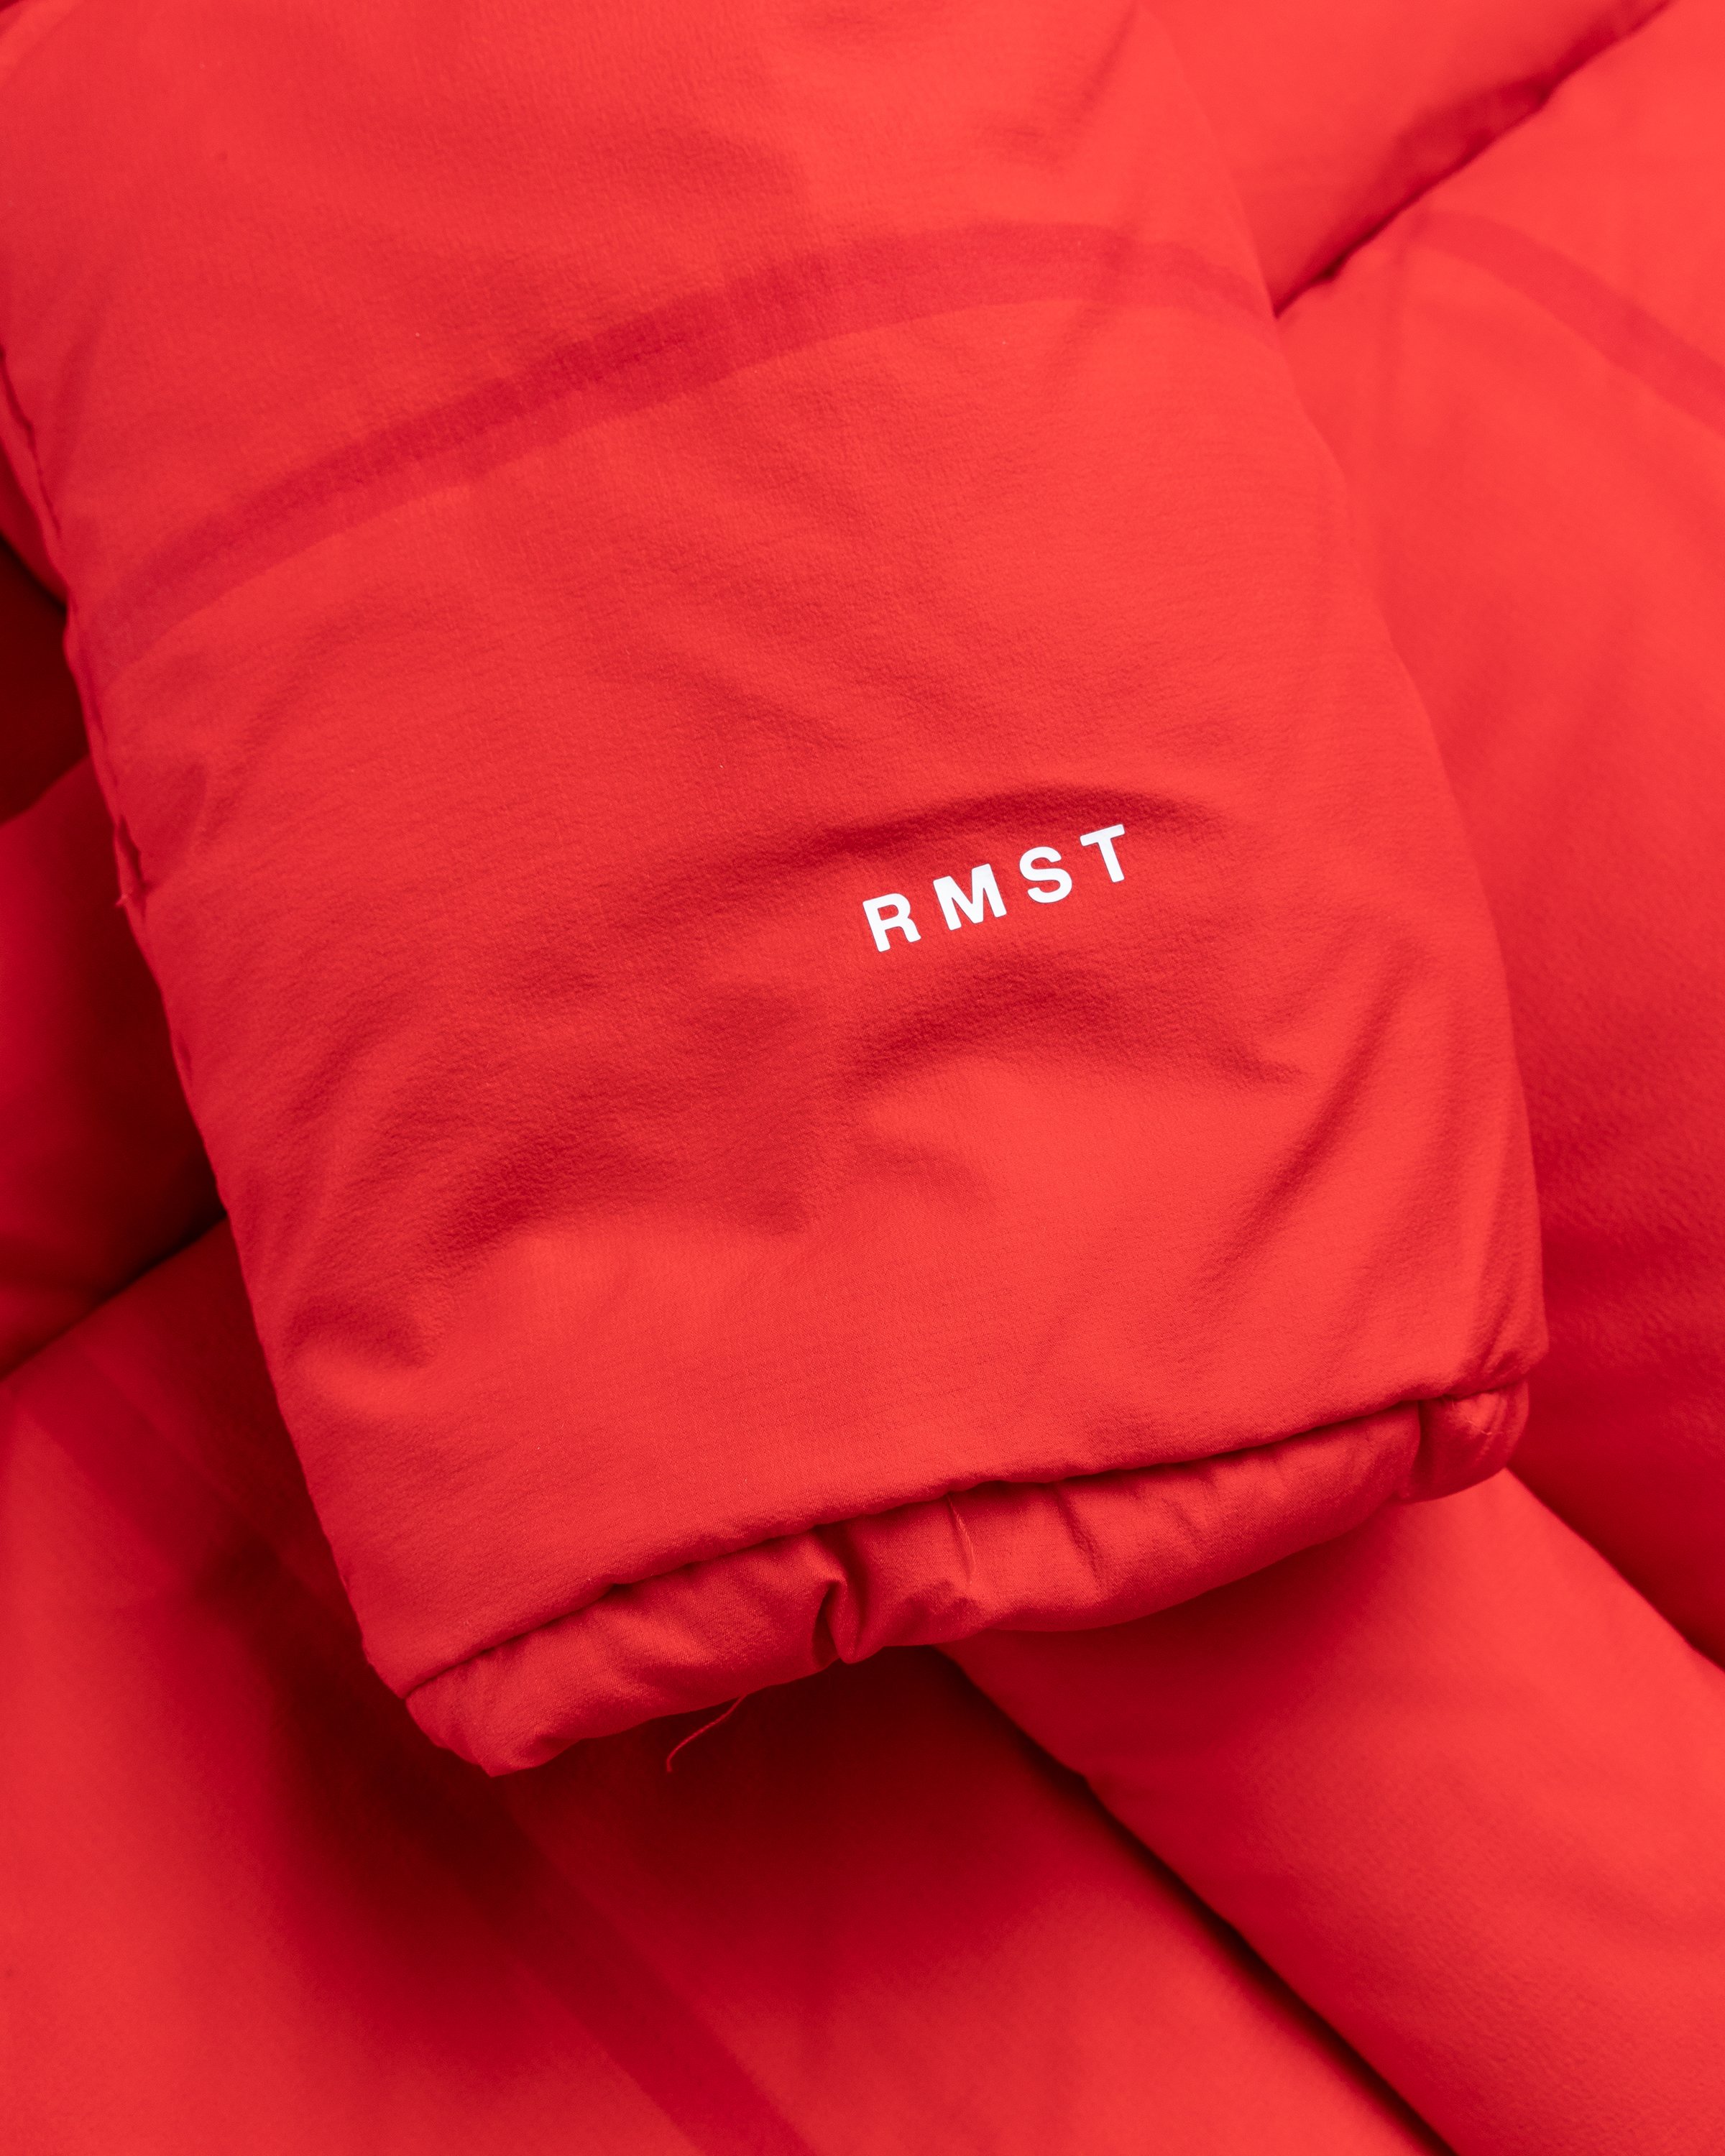 The North Face - RMST Himalayan Parka Red - Clothing - Red - Image 6